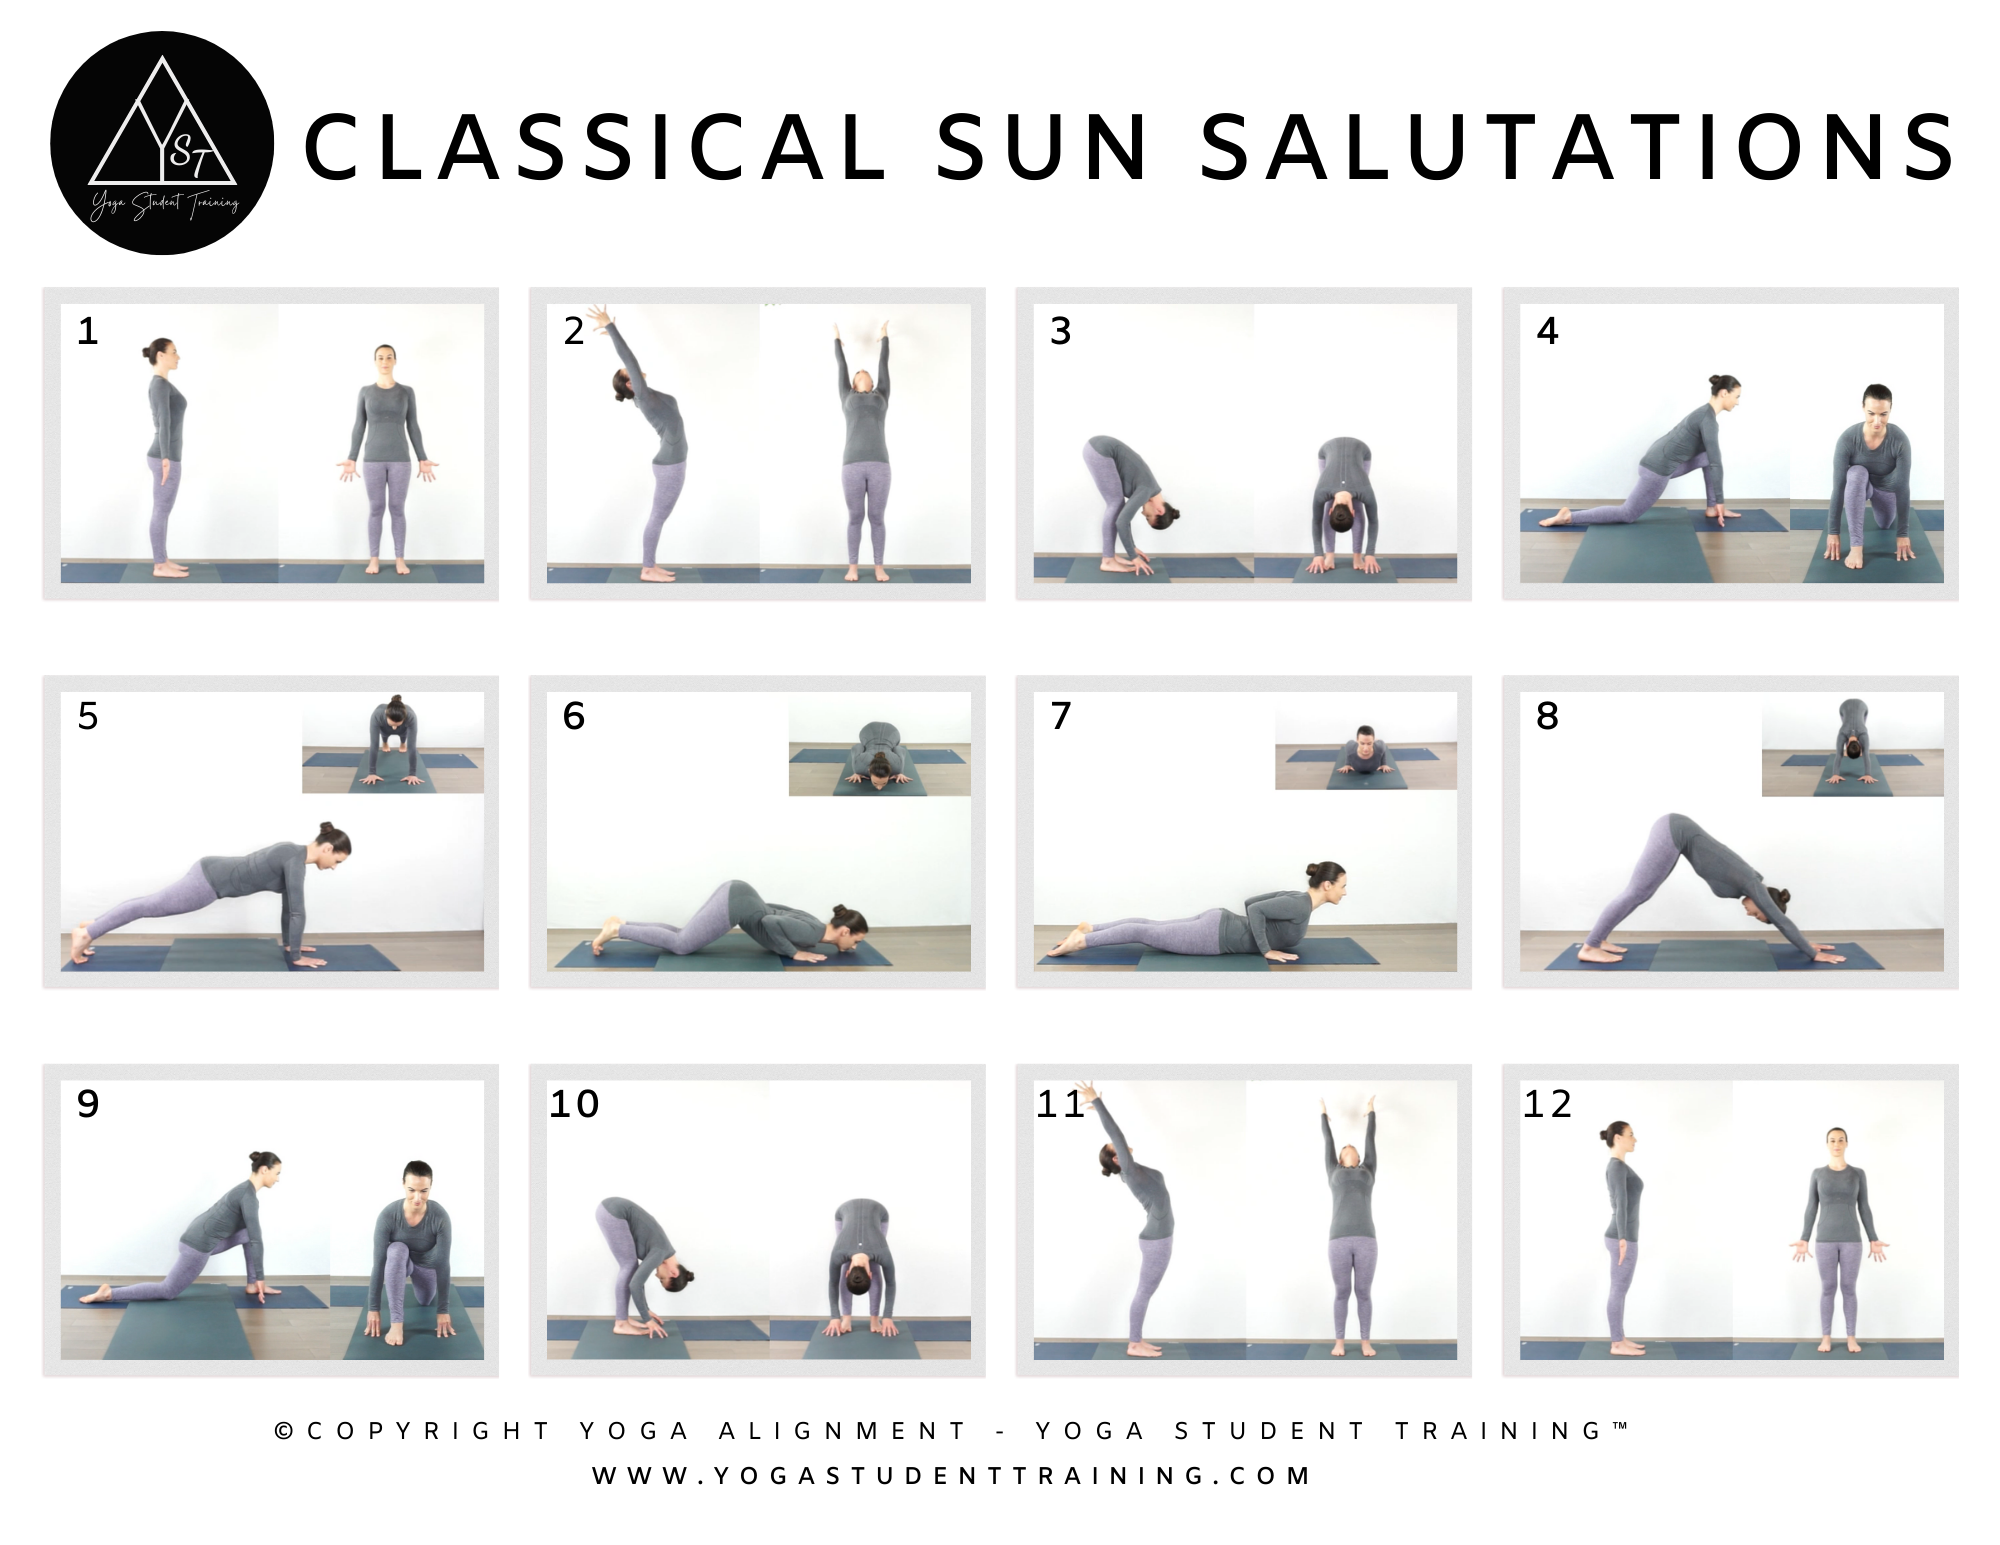 6 Yoga Poses for COPD Patients: Benefits of Sun Salutations | RxWiki